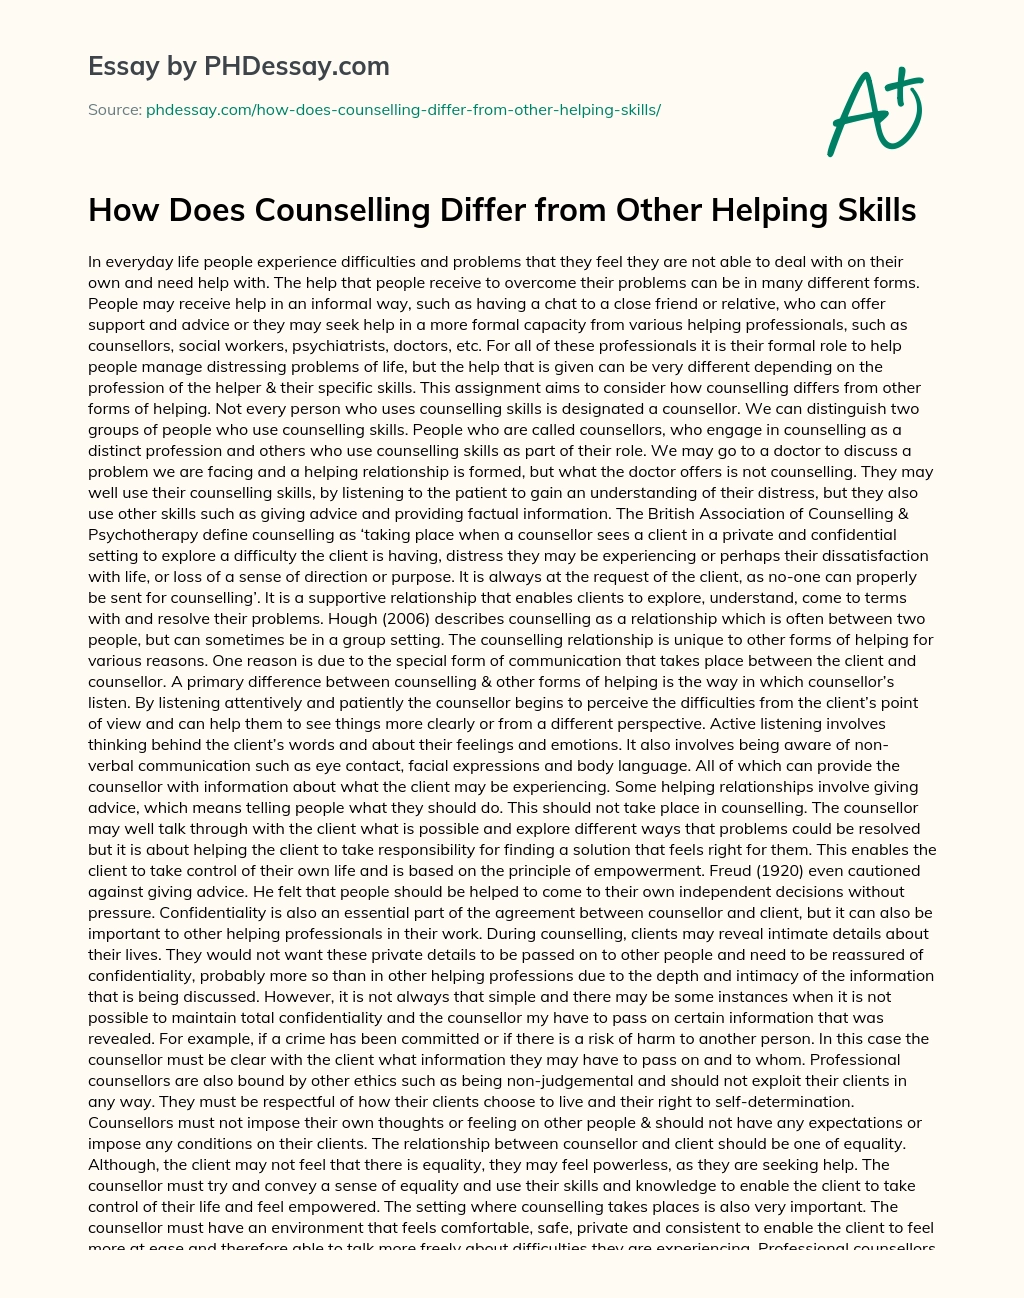 How Does Counselling Differ from Other Helping Skills essay